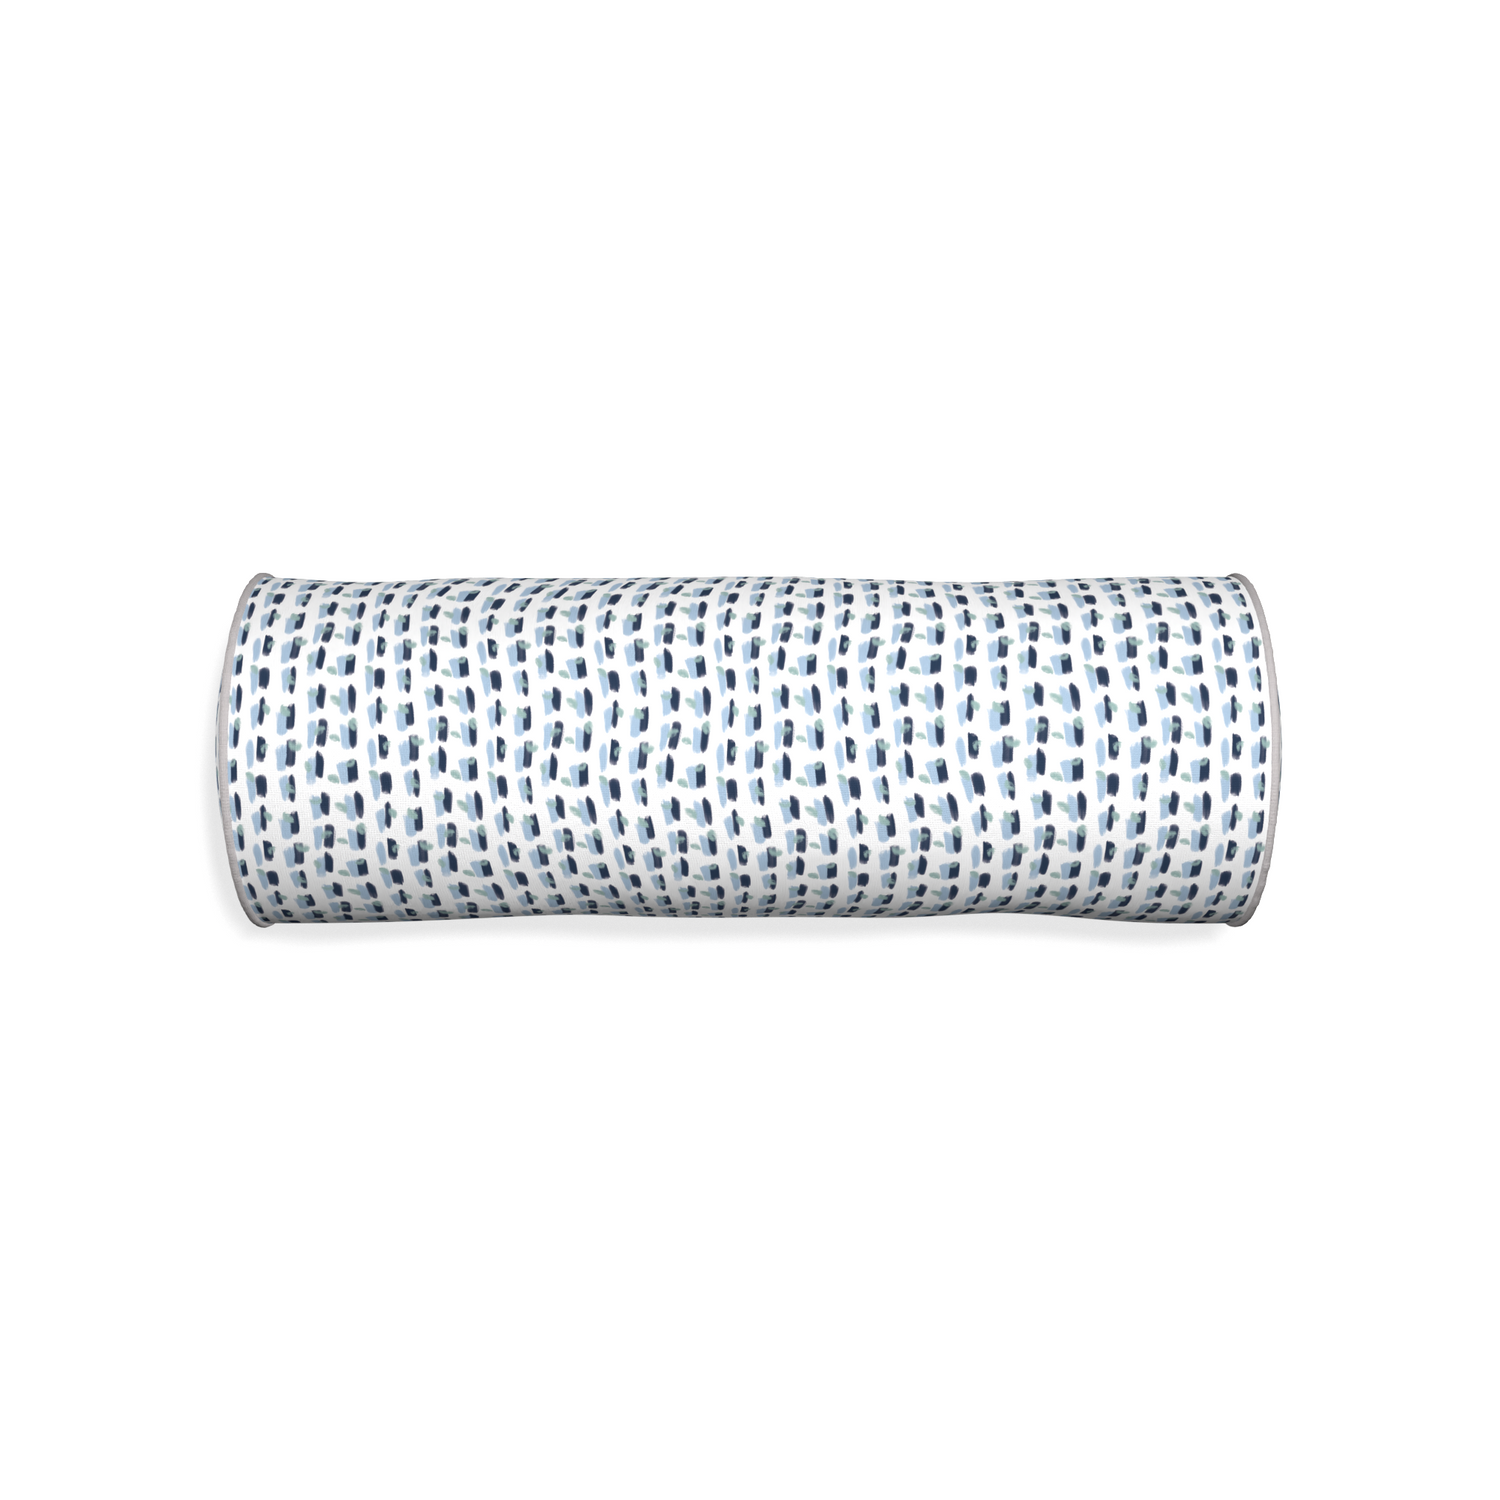 Bolster poppy blue custom blue and whitepillow with pebble piping on white background